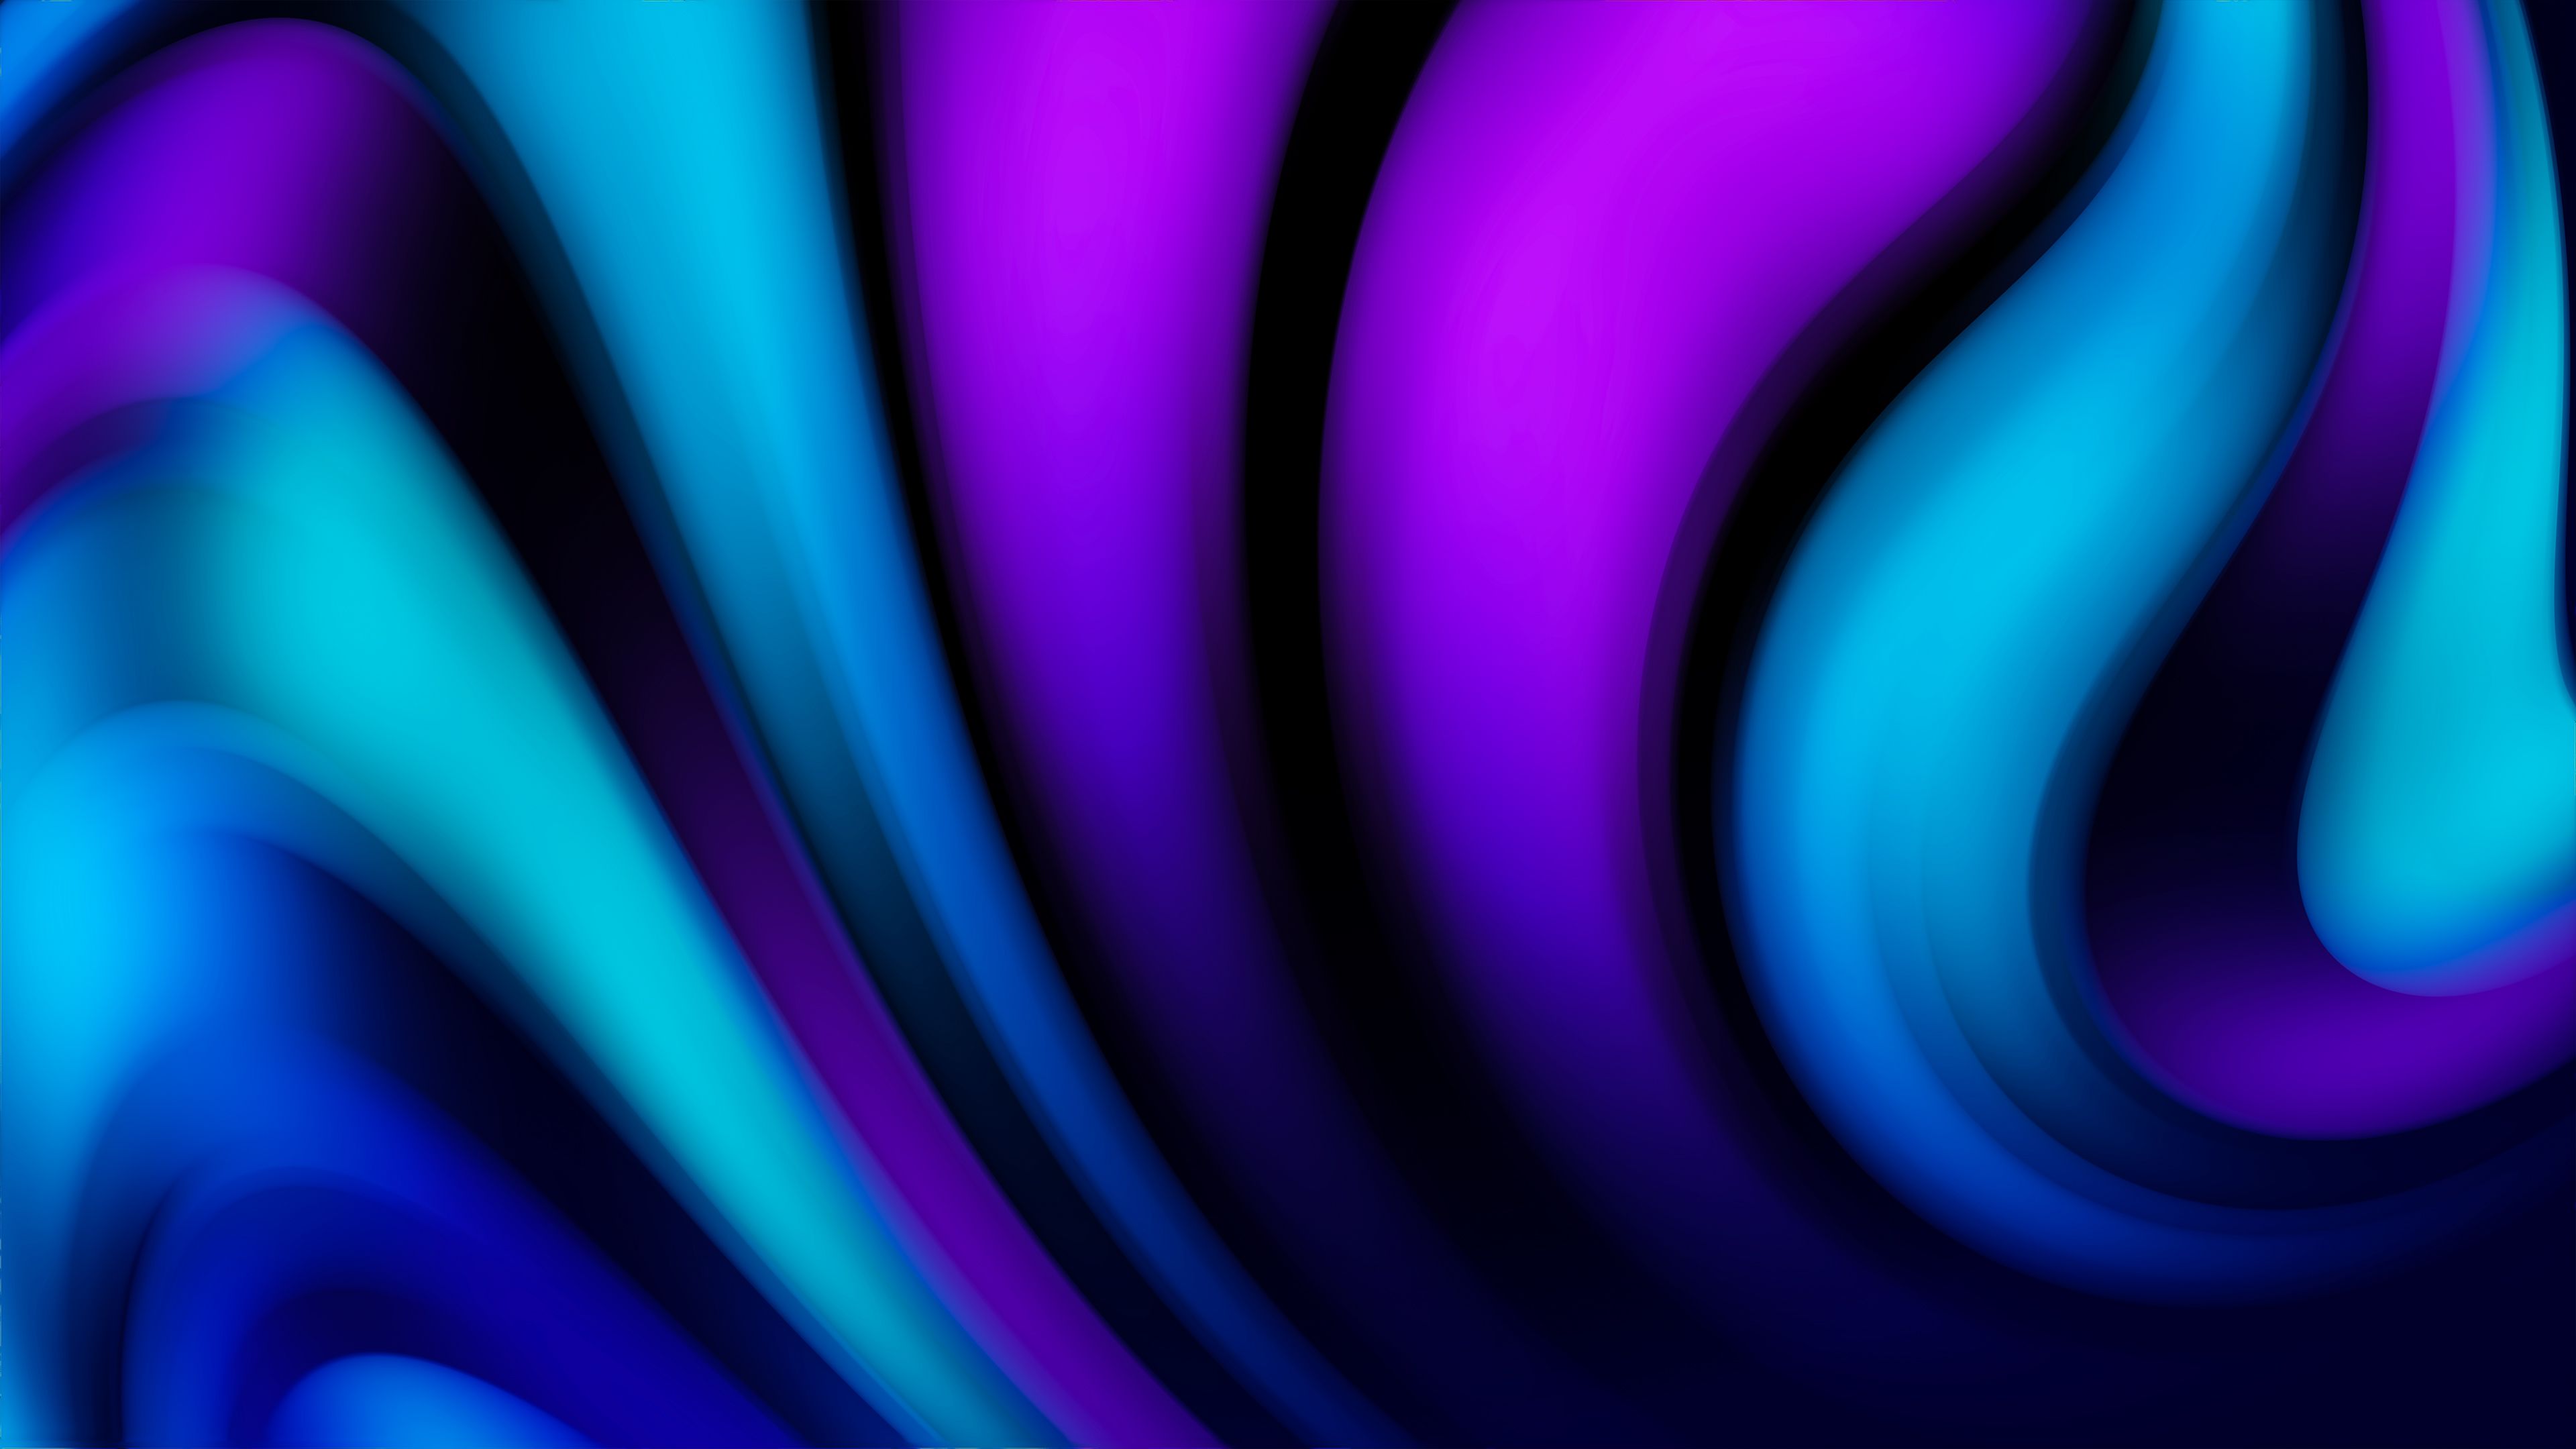 Blue Swirl Abstract Art Wallpapers